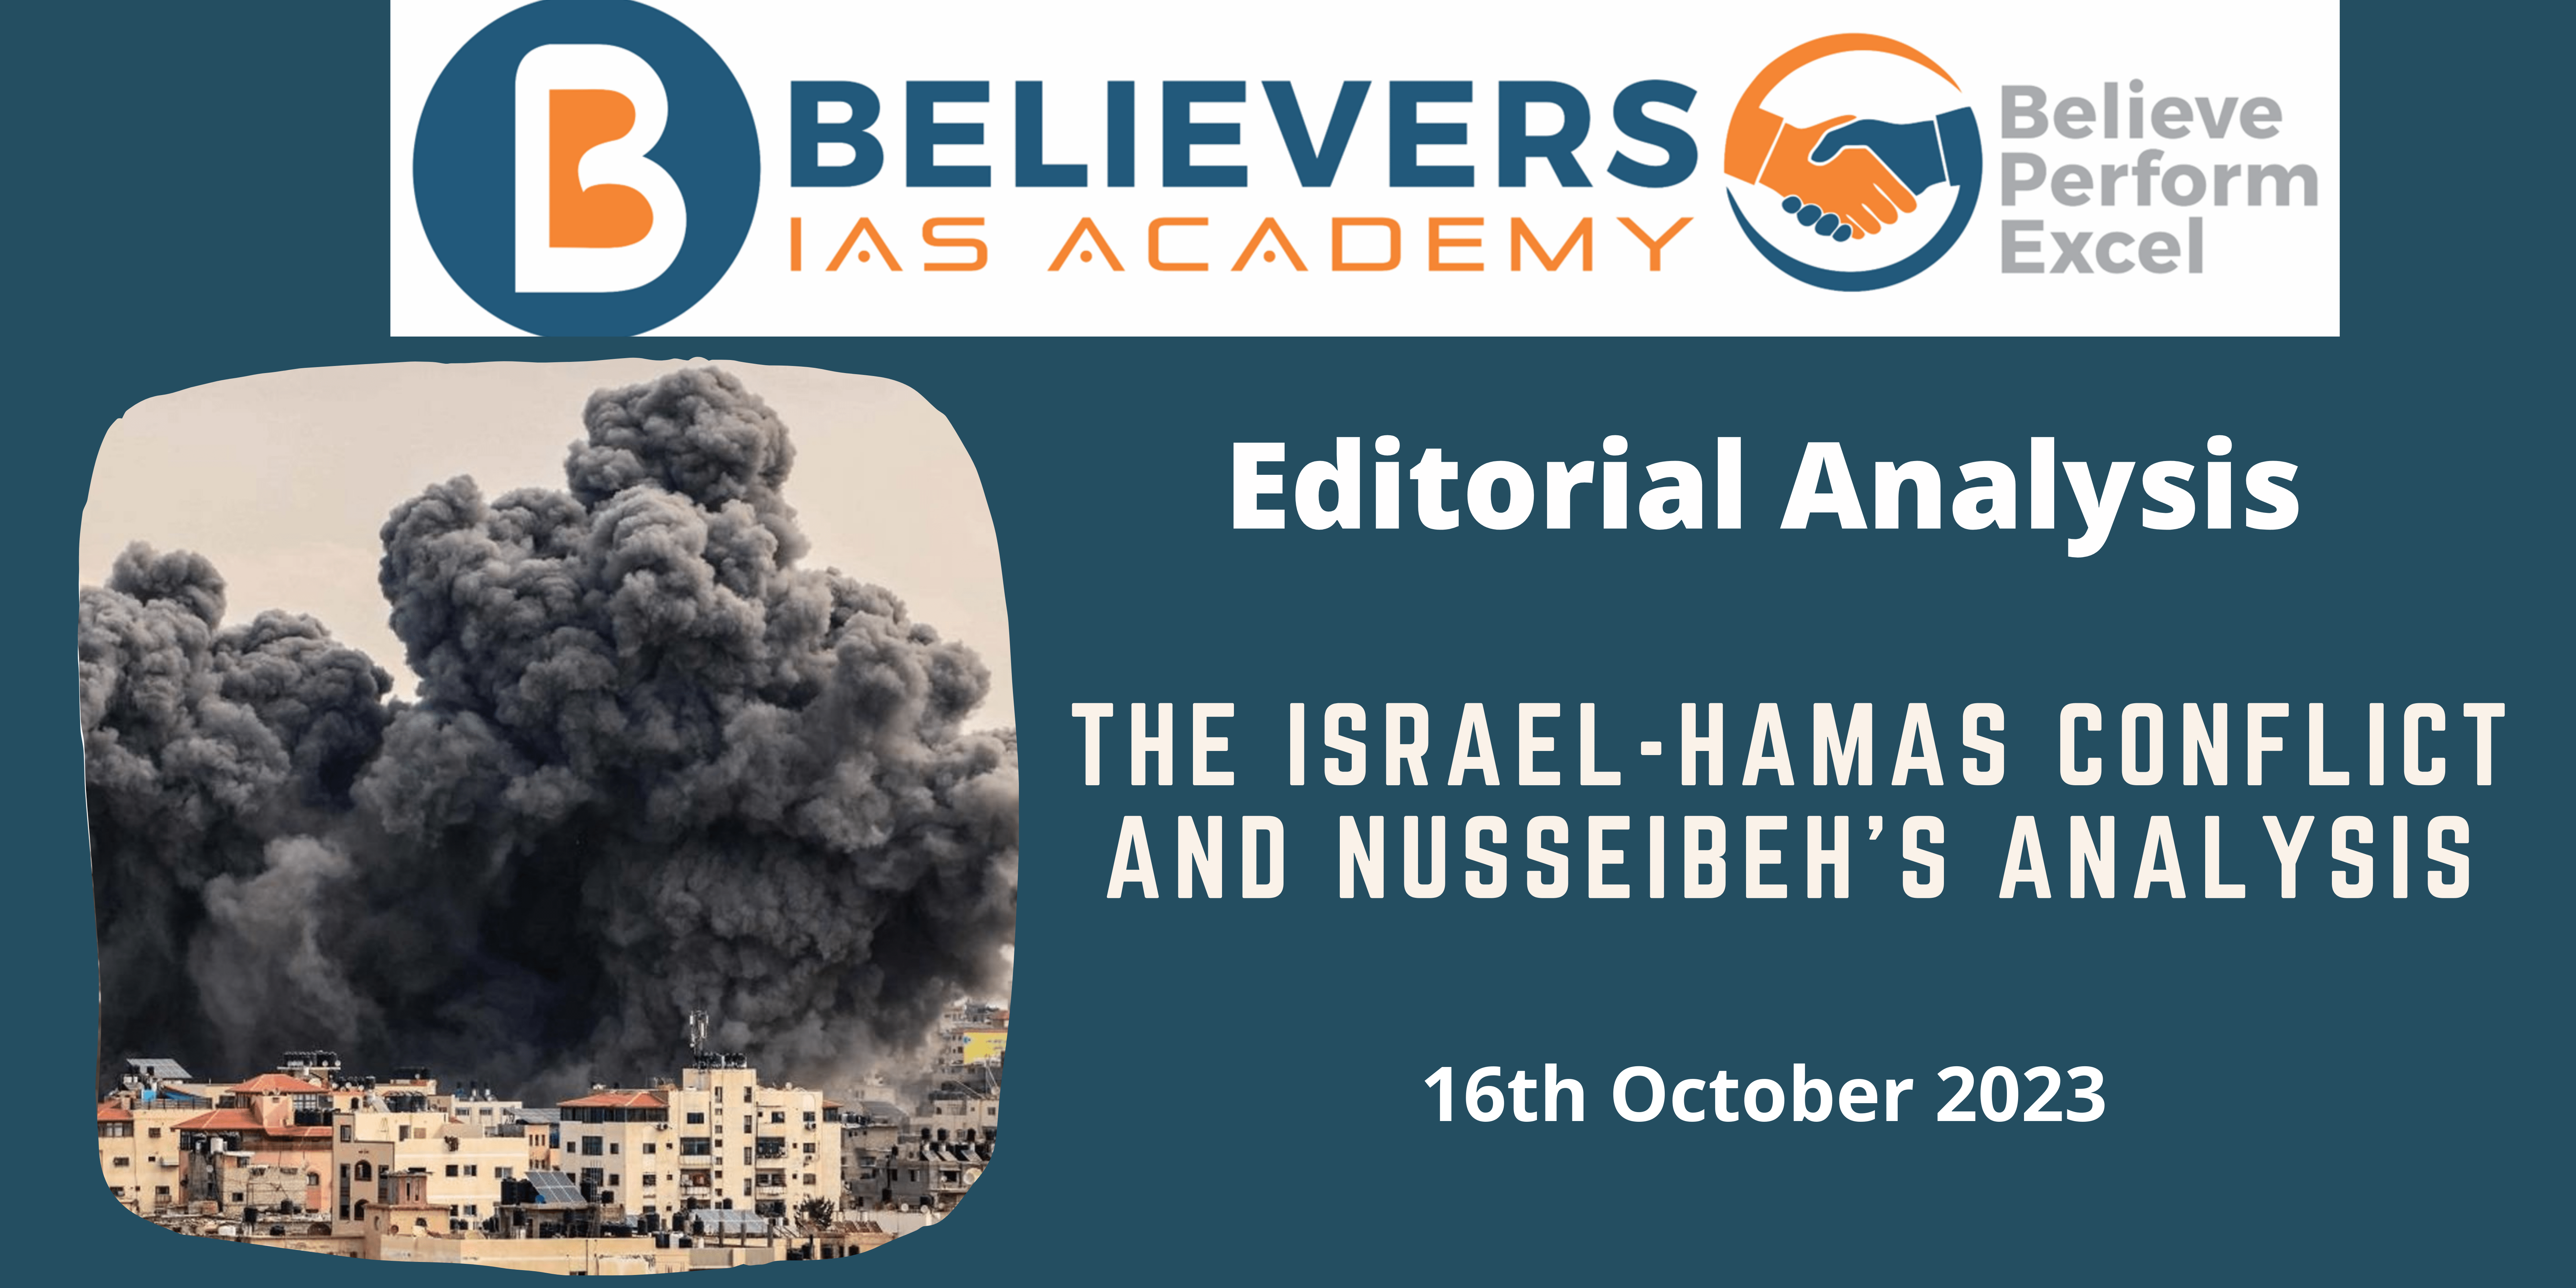 The Israel-Hamas conflict and Nusseibeh’s analysis